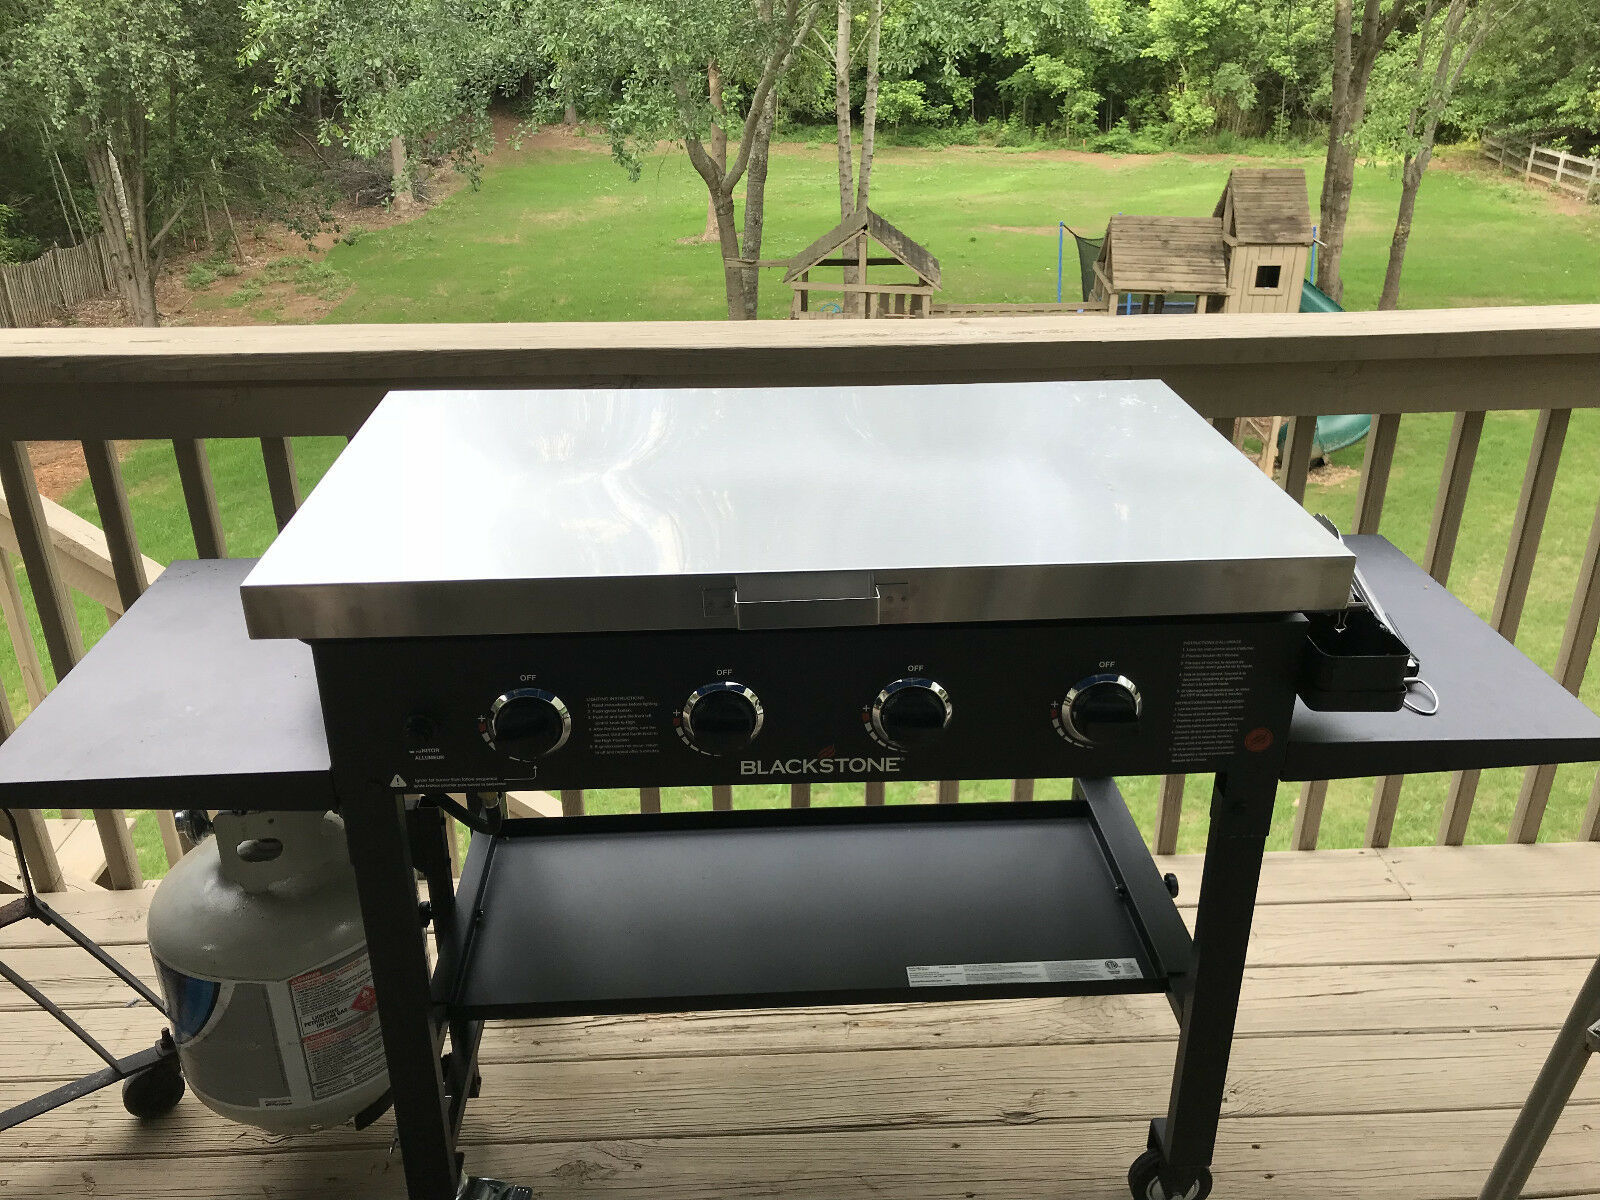 36" Blackstone Griddle stainless cover lid & windscreen rear-gridddle Blackstone Stainless Steel Griddle With Lid